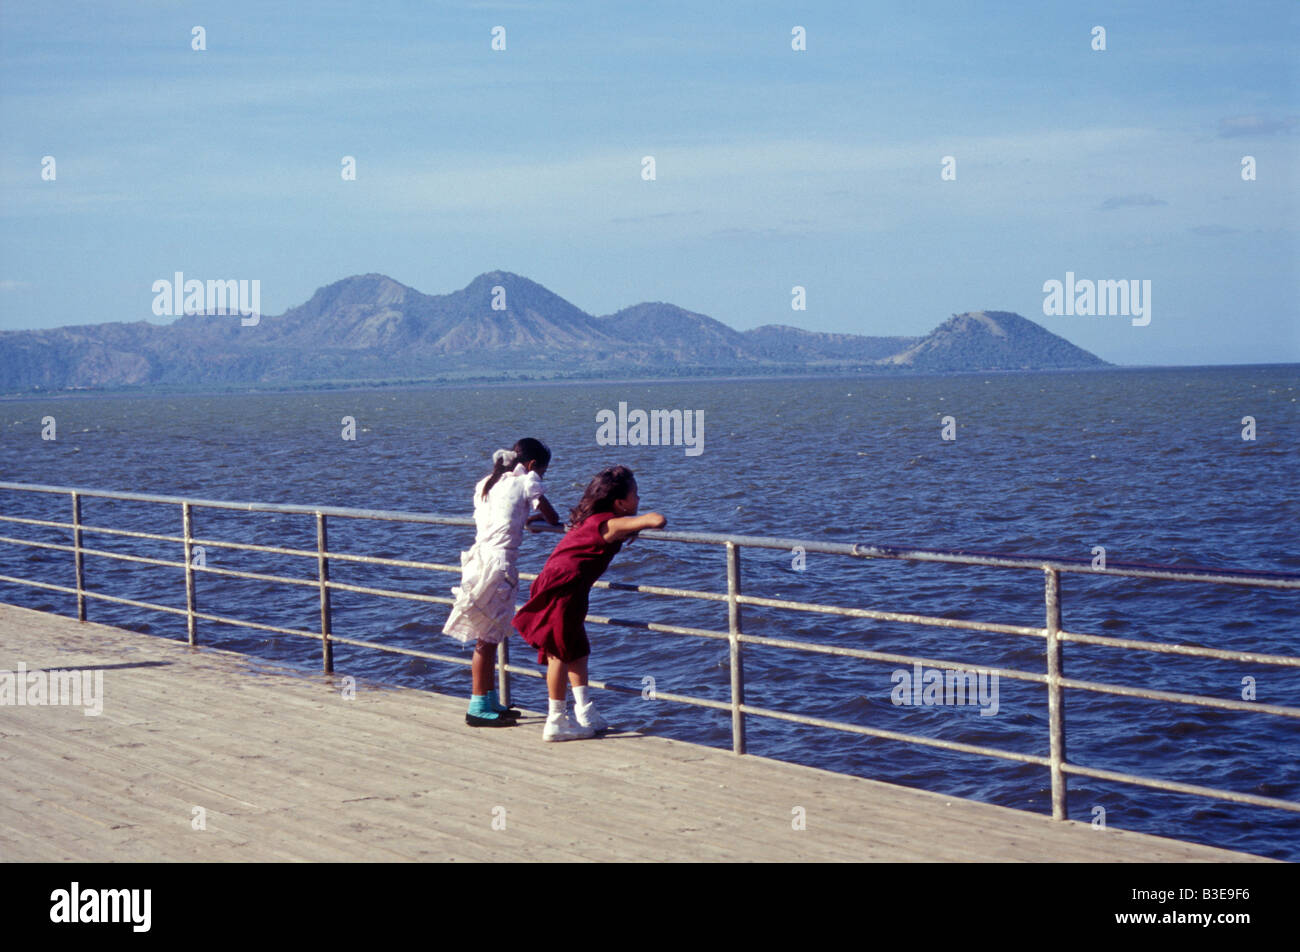 Two girls gazing at Lake Managua on the Malecón in Managua, Nicaragua Stock Photo